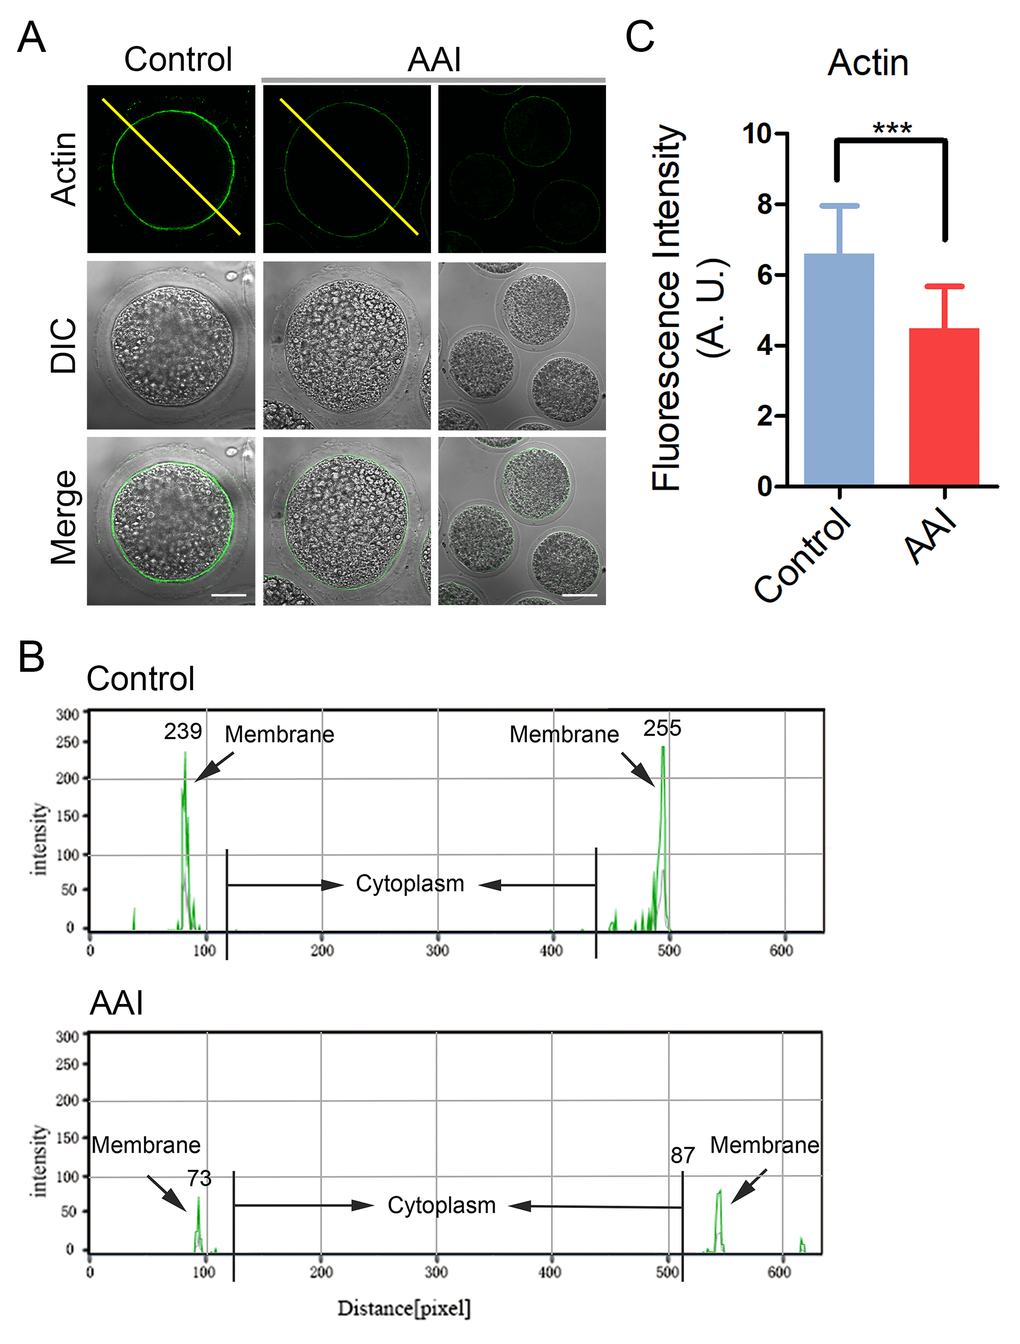 Effects of AAI exposure on the actin dynamics in porcine oocytes. (A) Representative images of actin filaments in control and AAI-exposed oocytes. Oocytes were immunostained with anti-phalloidin-FITC antibody to visualize the actin filaments. Scale bar, 25 and 60 μm. (B) The fluorescence intensity profiling of actin filaments in oocytes. Lines were drawn through the oocytes, and pixel intensities were quantified along the lines. (C) The fluorescence intensity of actin signals was measured in control and AAI-exposed oocytes. Data were presented as mean percentage (mean ± SEM) of at least three independent experiments. ***P 